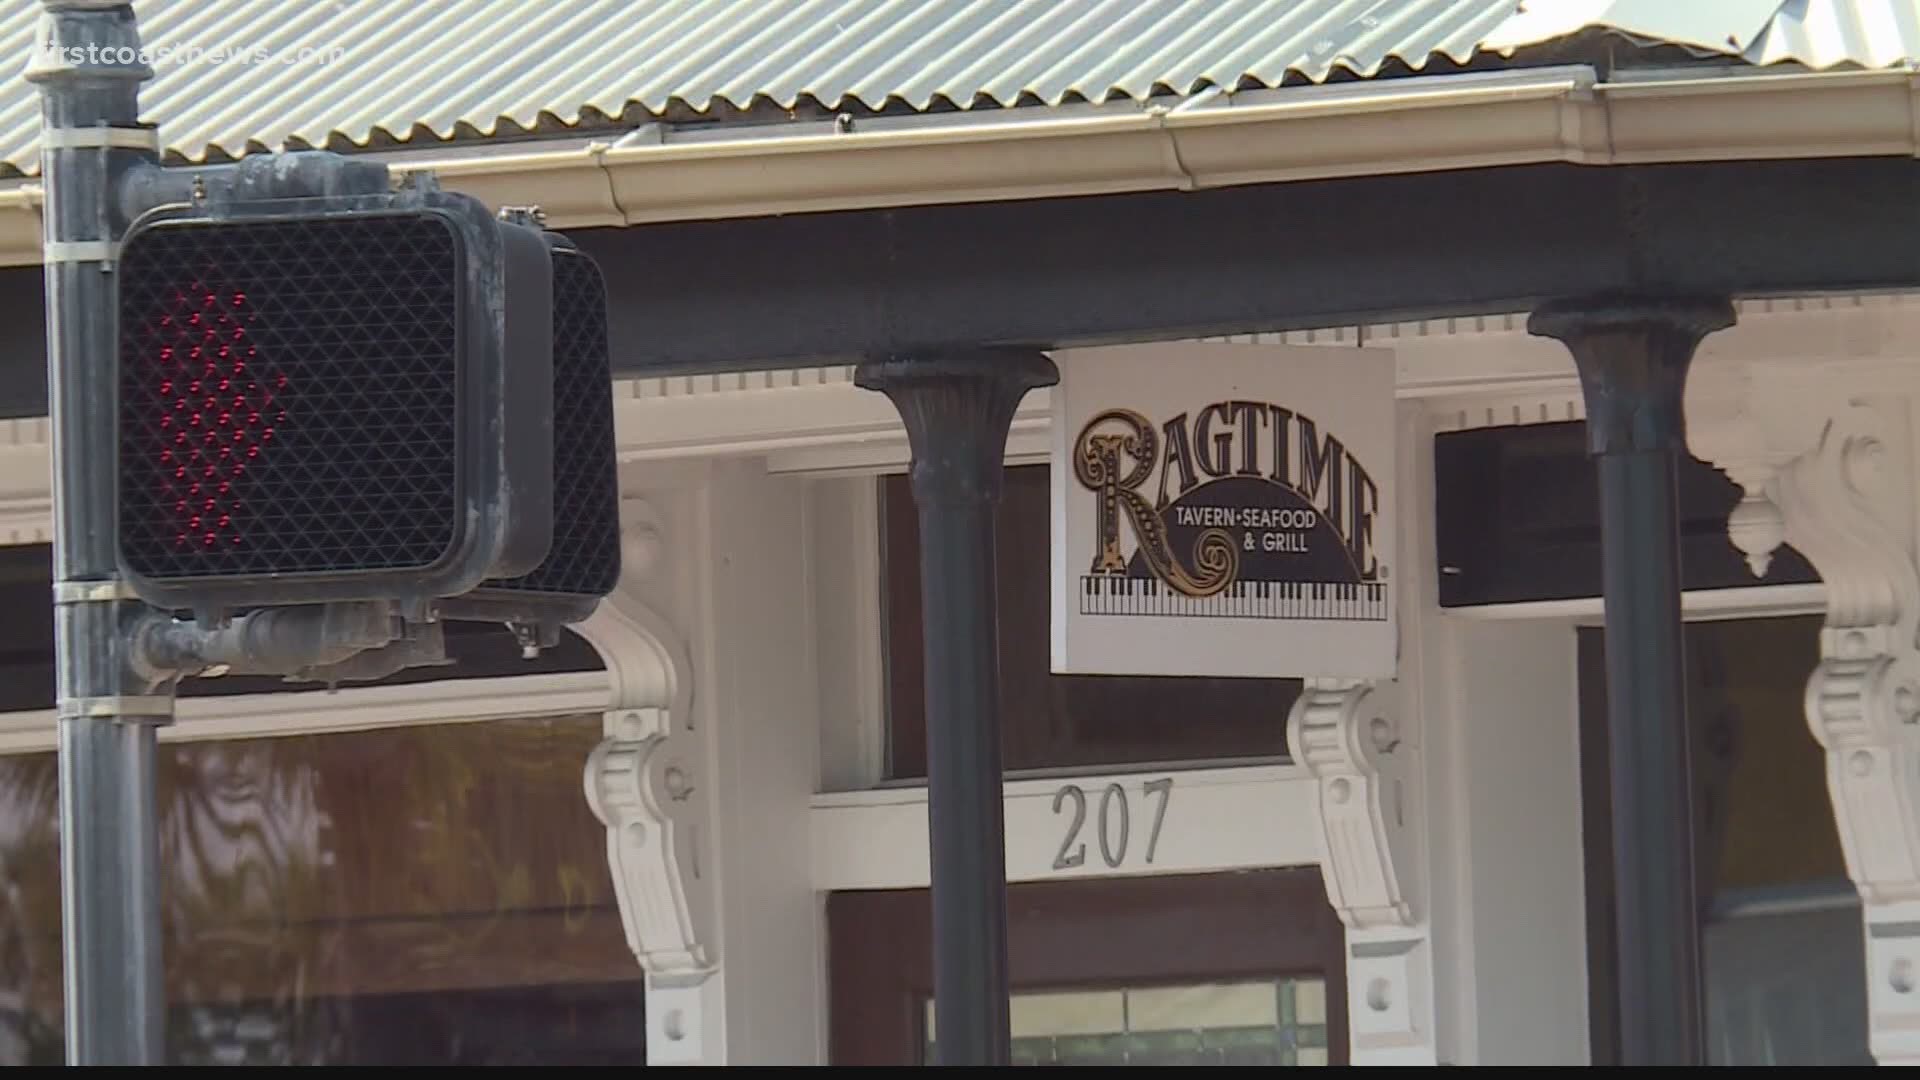 Brian Shaner, the director of operations for RagTime in Atlantic Beach, says they are gearing up for the RNC while taking every precaution possible for the pandemic.